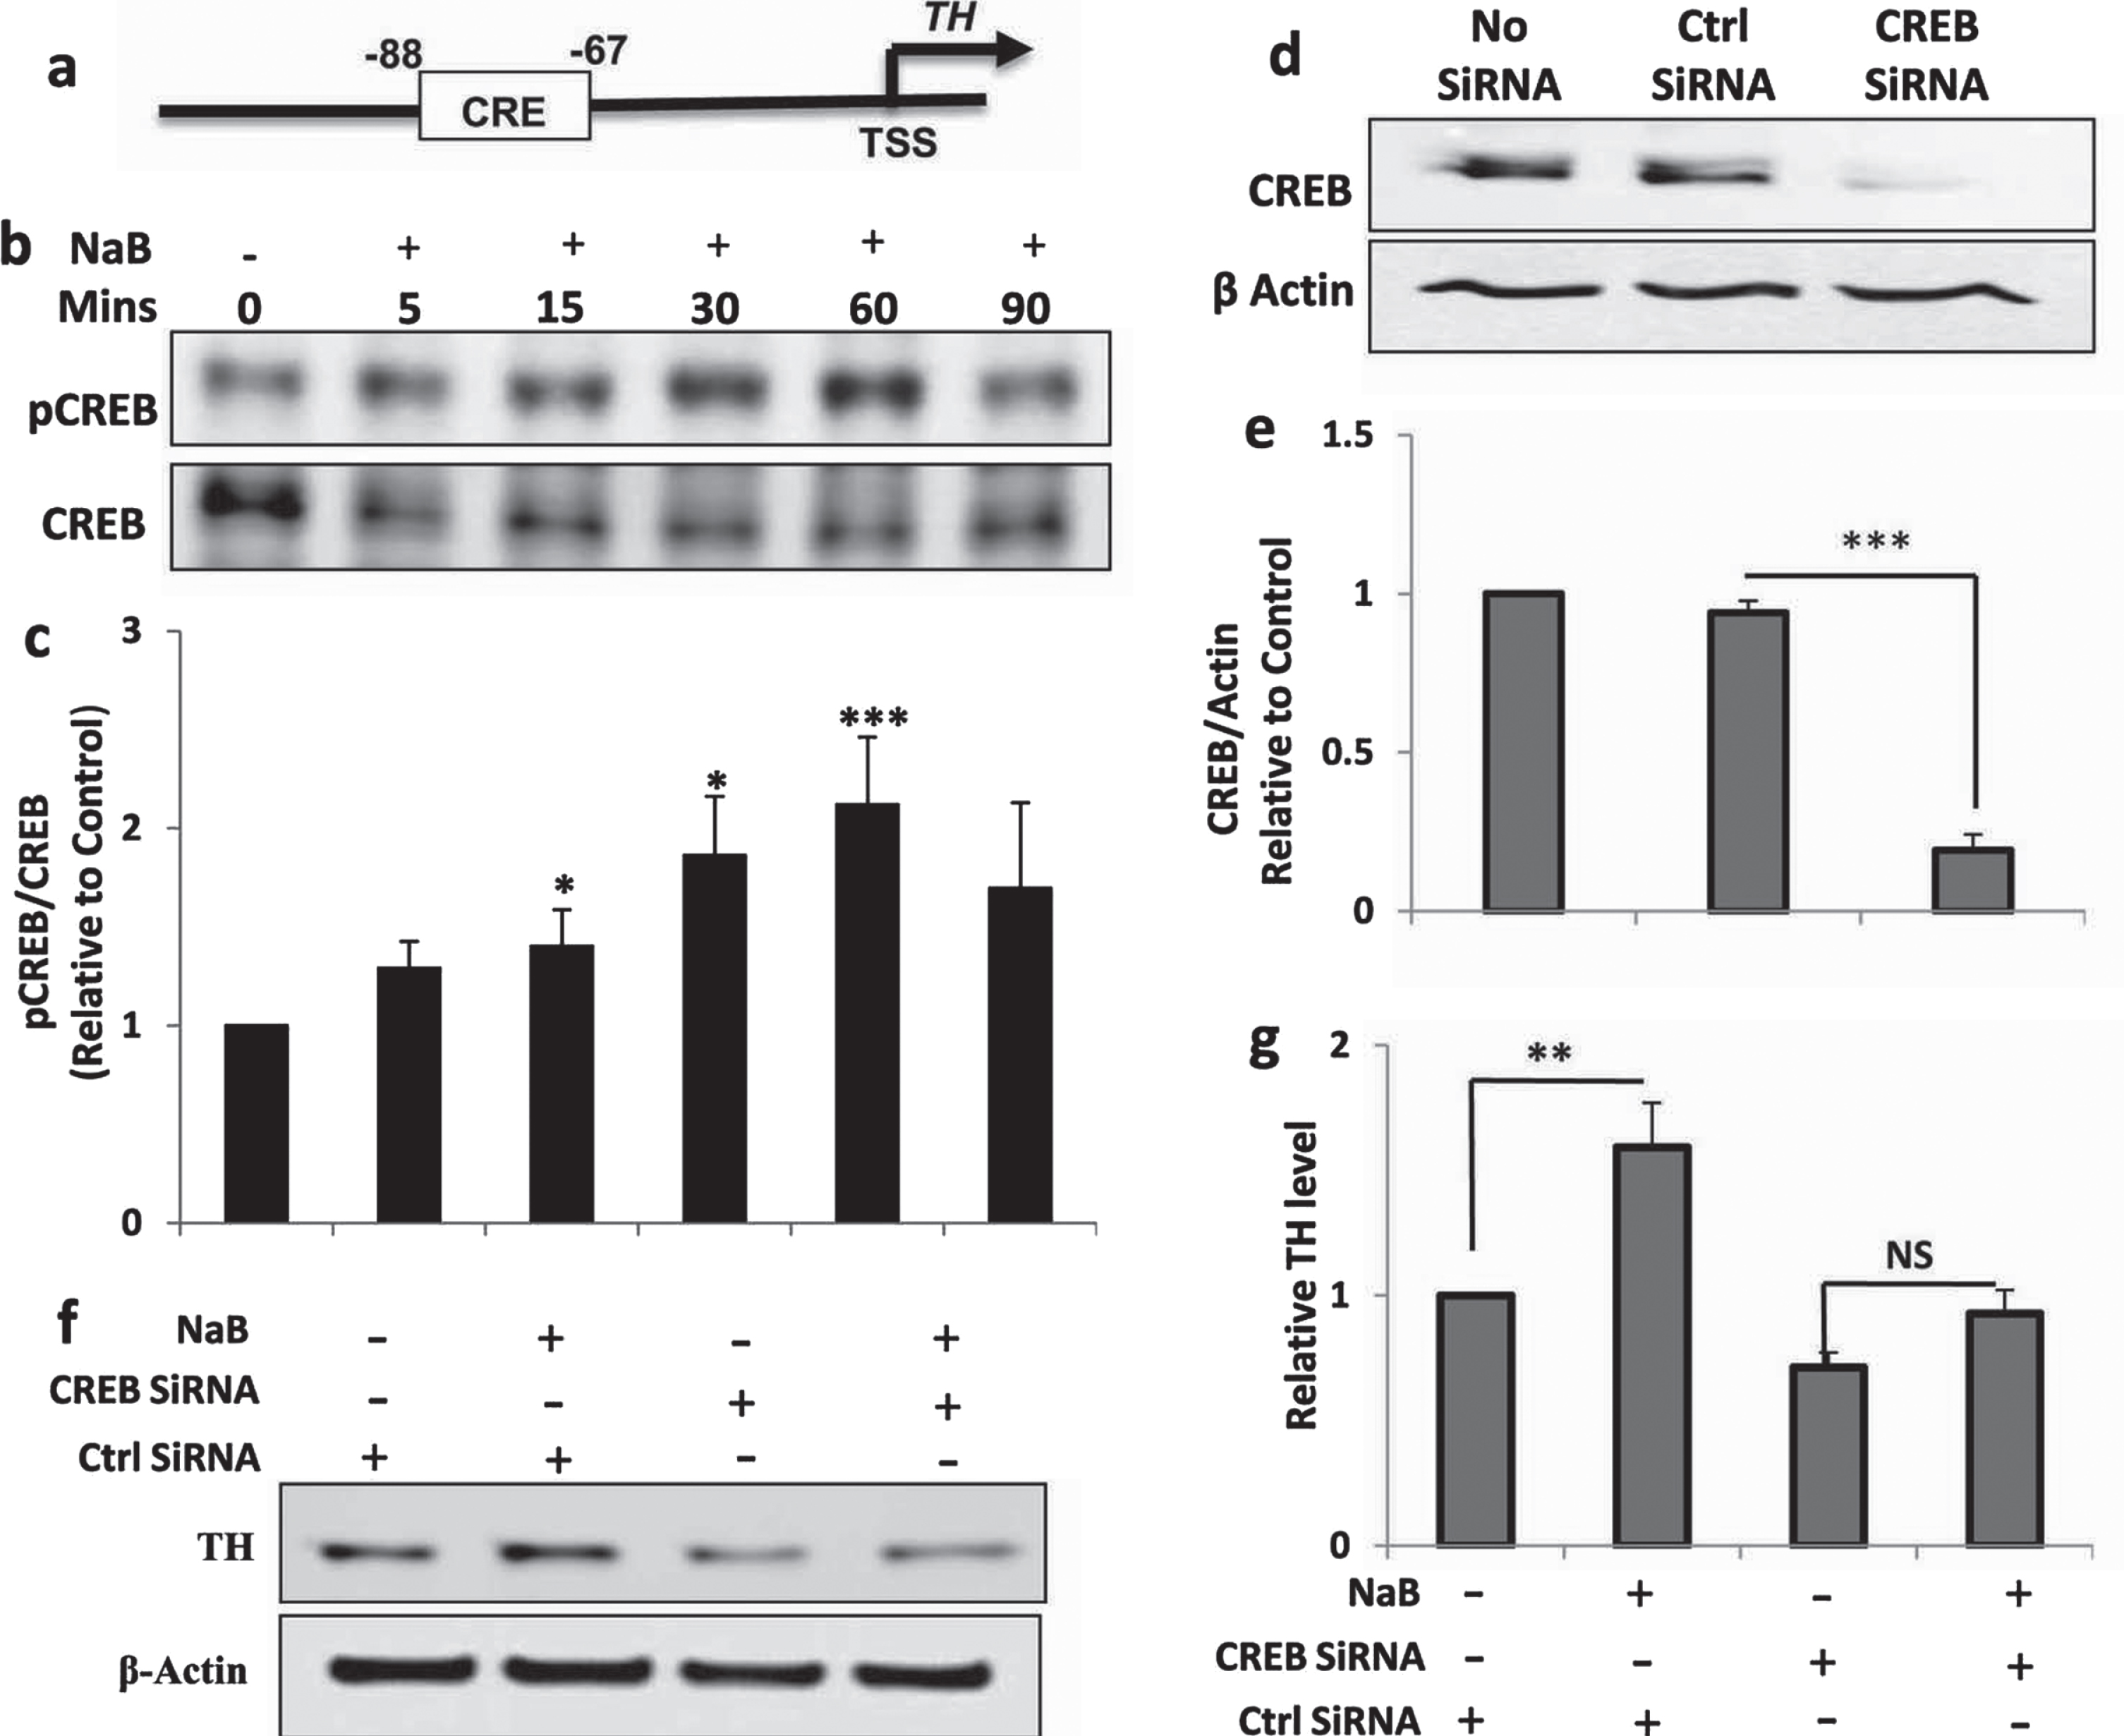 NaB increases the expression of TH in MN9D neuronal cells via CREB. A) TH gene promoter harbors a consensus CRE. MN9D neuronal cells were treated with 200μM NaB for different min under serum-free conditions followed by monitoring the level of phospho-CREB (pCREB) by western blot (B). Graph represents densitometric analysis of pCREB protein levels normalized to total CREB (loading control) (C). Results are mean±SD of three independent experiments. ***p < 0.001 versus control; *p < 0.05 versus control. D) Cells were transfected with either control or CREB siRNA. Forty-eight h after transfection, level of CREB was monitored by western blot. E) Graph represents densitometric analysis of CREB protein levels normalized to β-Actin (loading control). Results are mean±SD of three independent experiments. ***p < 0.001 versus control (no siRNA). F) Cells were transfected with either control siRNA or CREB siRNA. Forty-eight h after transfection, cells were treated with 200μM NaB for 2 h under serum-free condition followed by monitoring the level of TH by western blot. G) Graph represents densitometric analysis of TH protein levels normalized to β-Actin (loading control). Results are mean±SD of three independent experiments. **p < 0.01 versus control. NS, not significant.